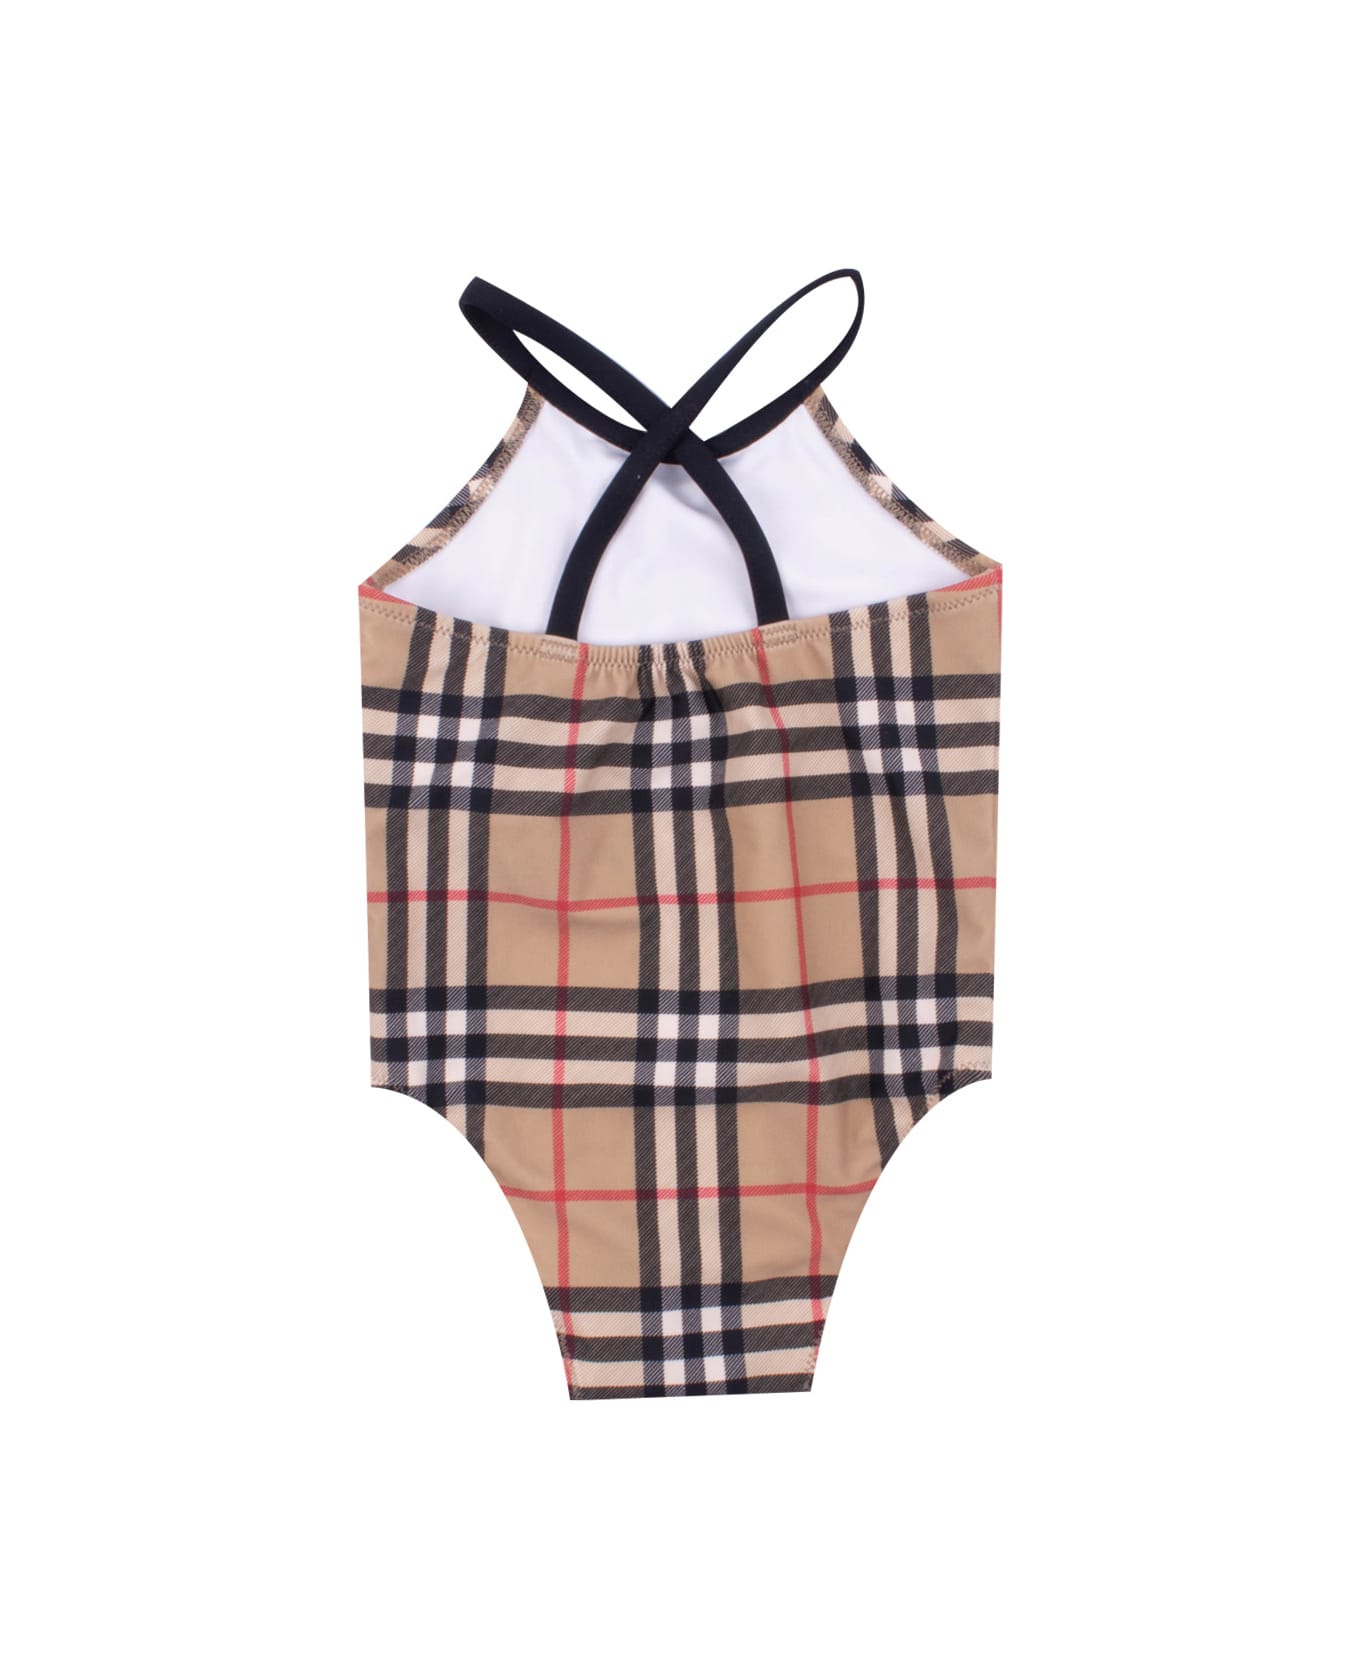 Burberry One Piece Swimsuit With Nylon Print - Multicolor